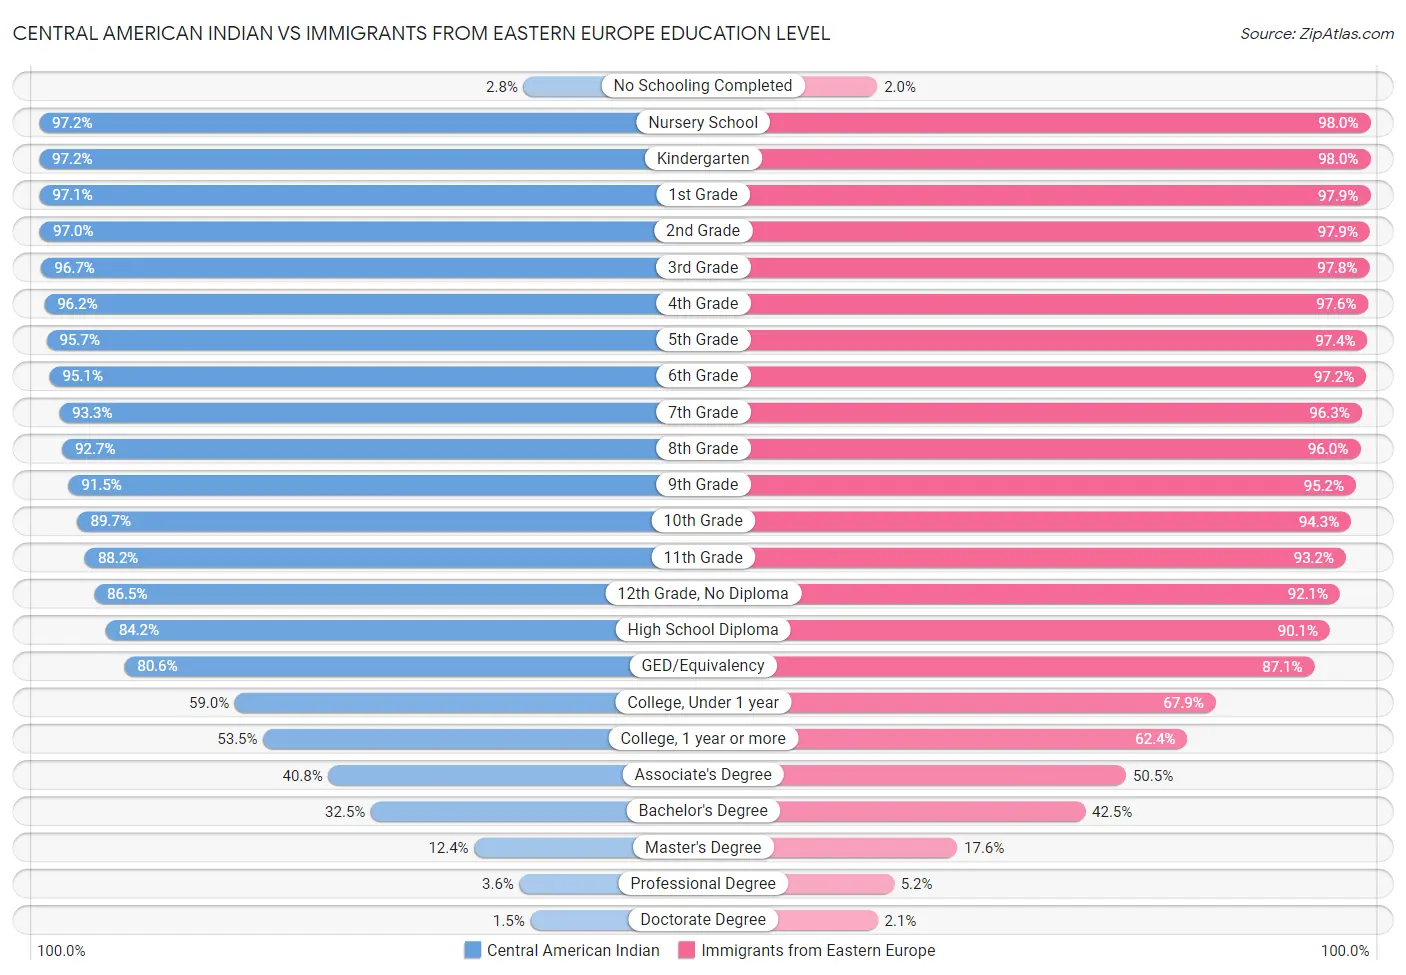 Central American Indian vs Immigrants from Eastern Europe Education Level